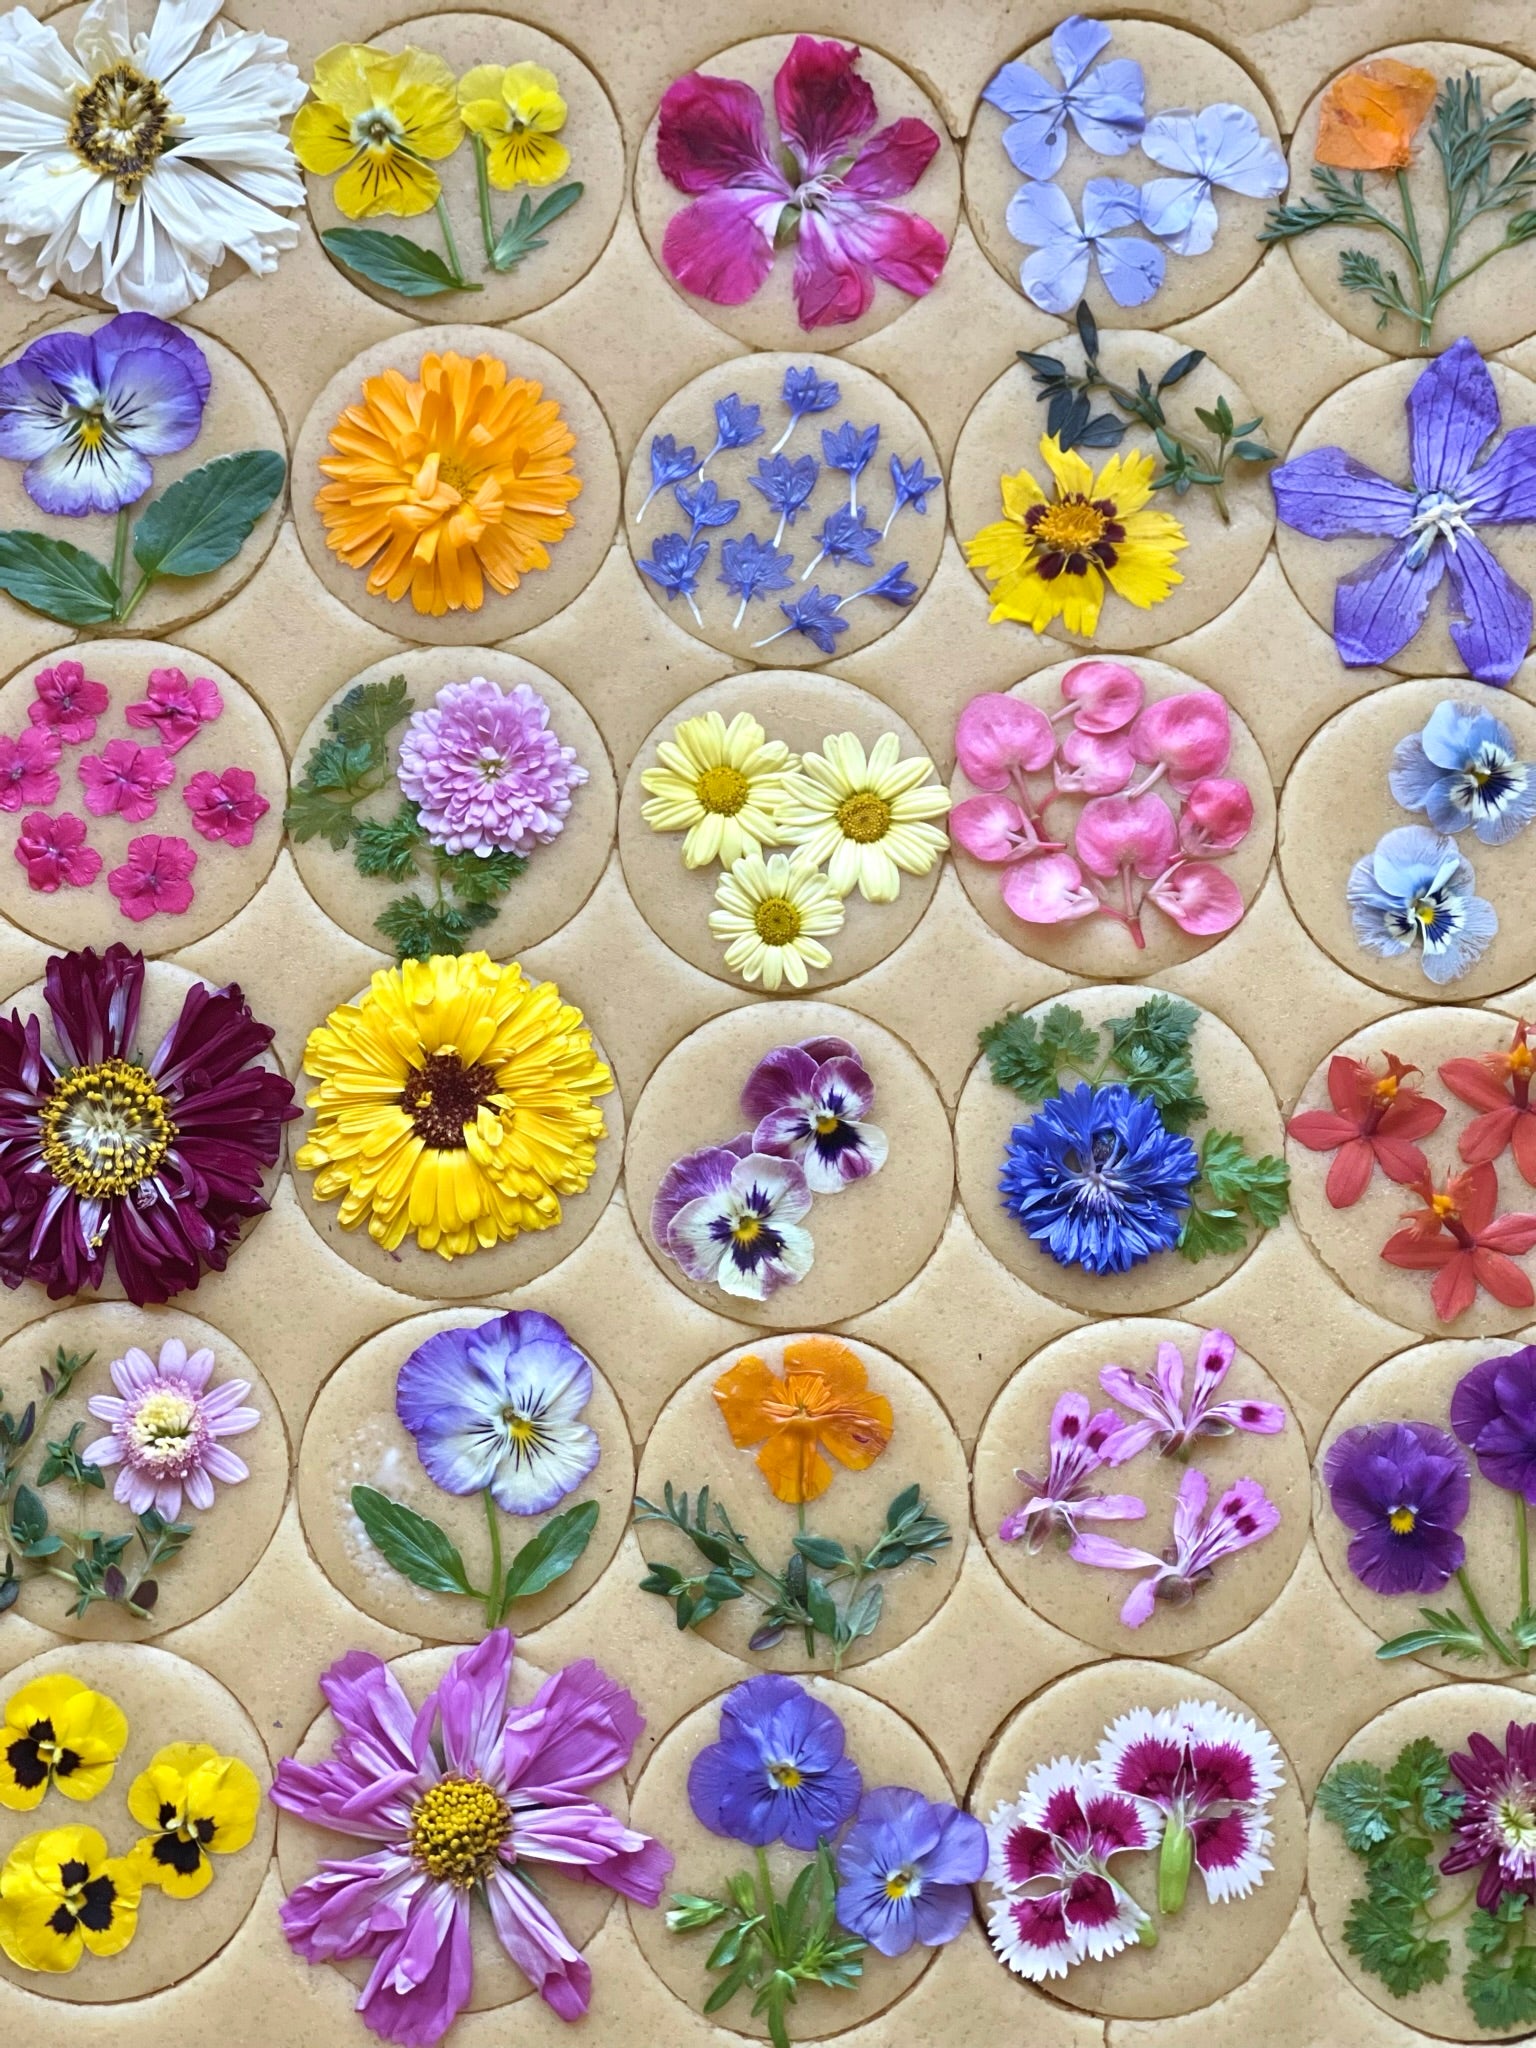 Edible Flowers for Drinks - Flowers You Can Eat